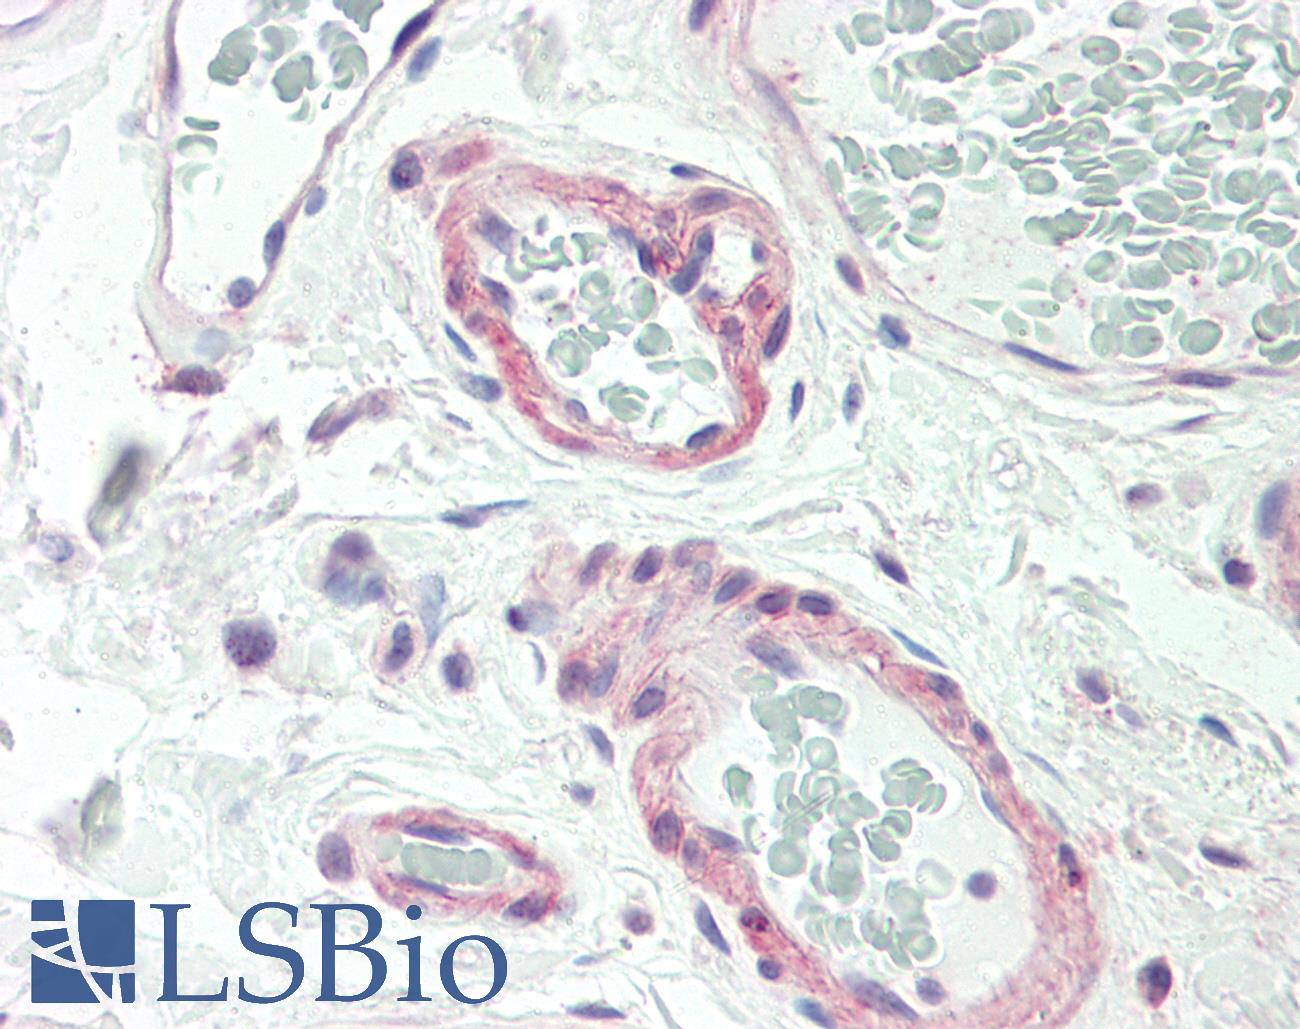 CALCR / Calcitonin Receptor Antibody - Anti-CALCR / Calcitonin Receptor antibody IHC staining of human colon, vessels. Immunohistochemistry of formalin-fixed, paraffin-embedded tissue after heat-induced antigen retrieval. Antibody dilution 1:50.